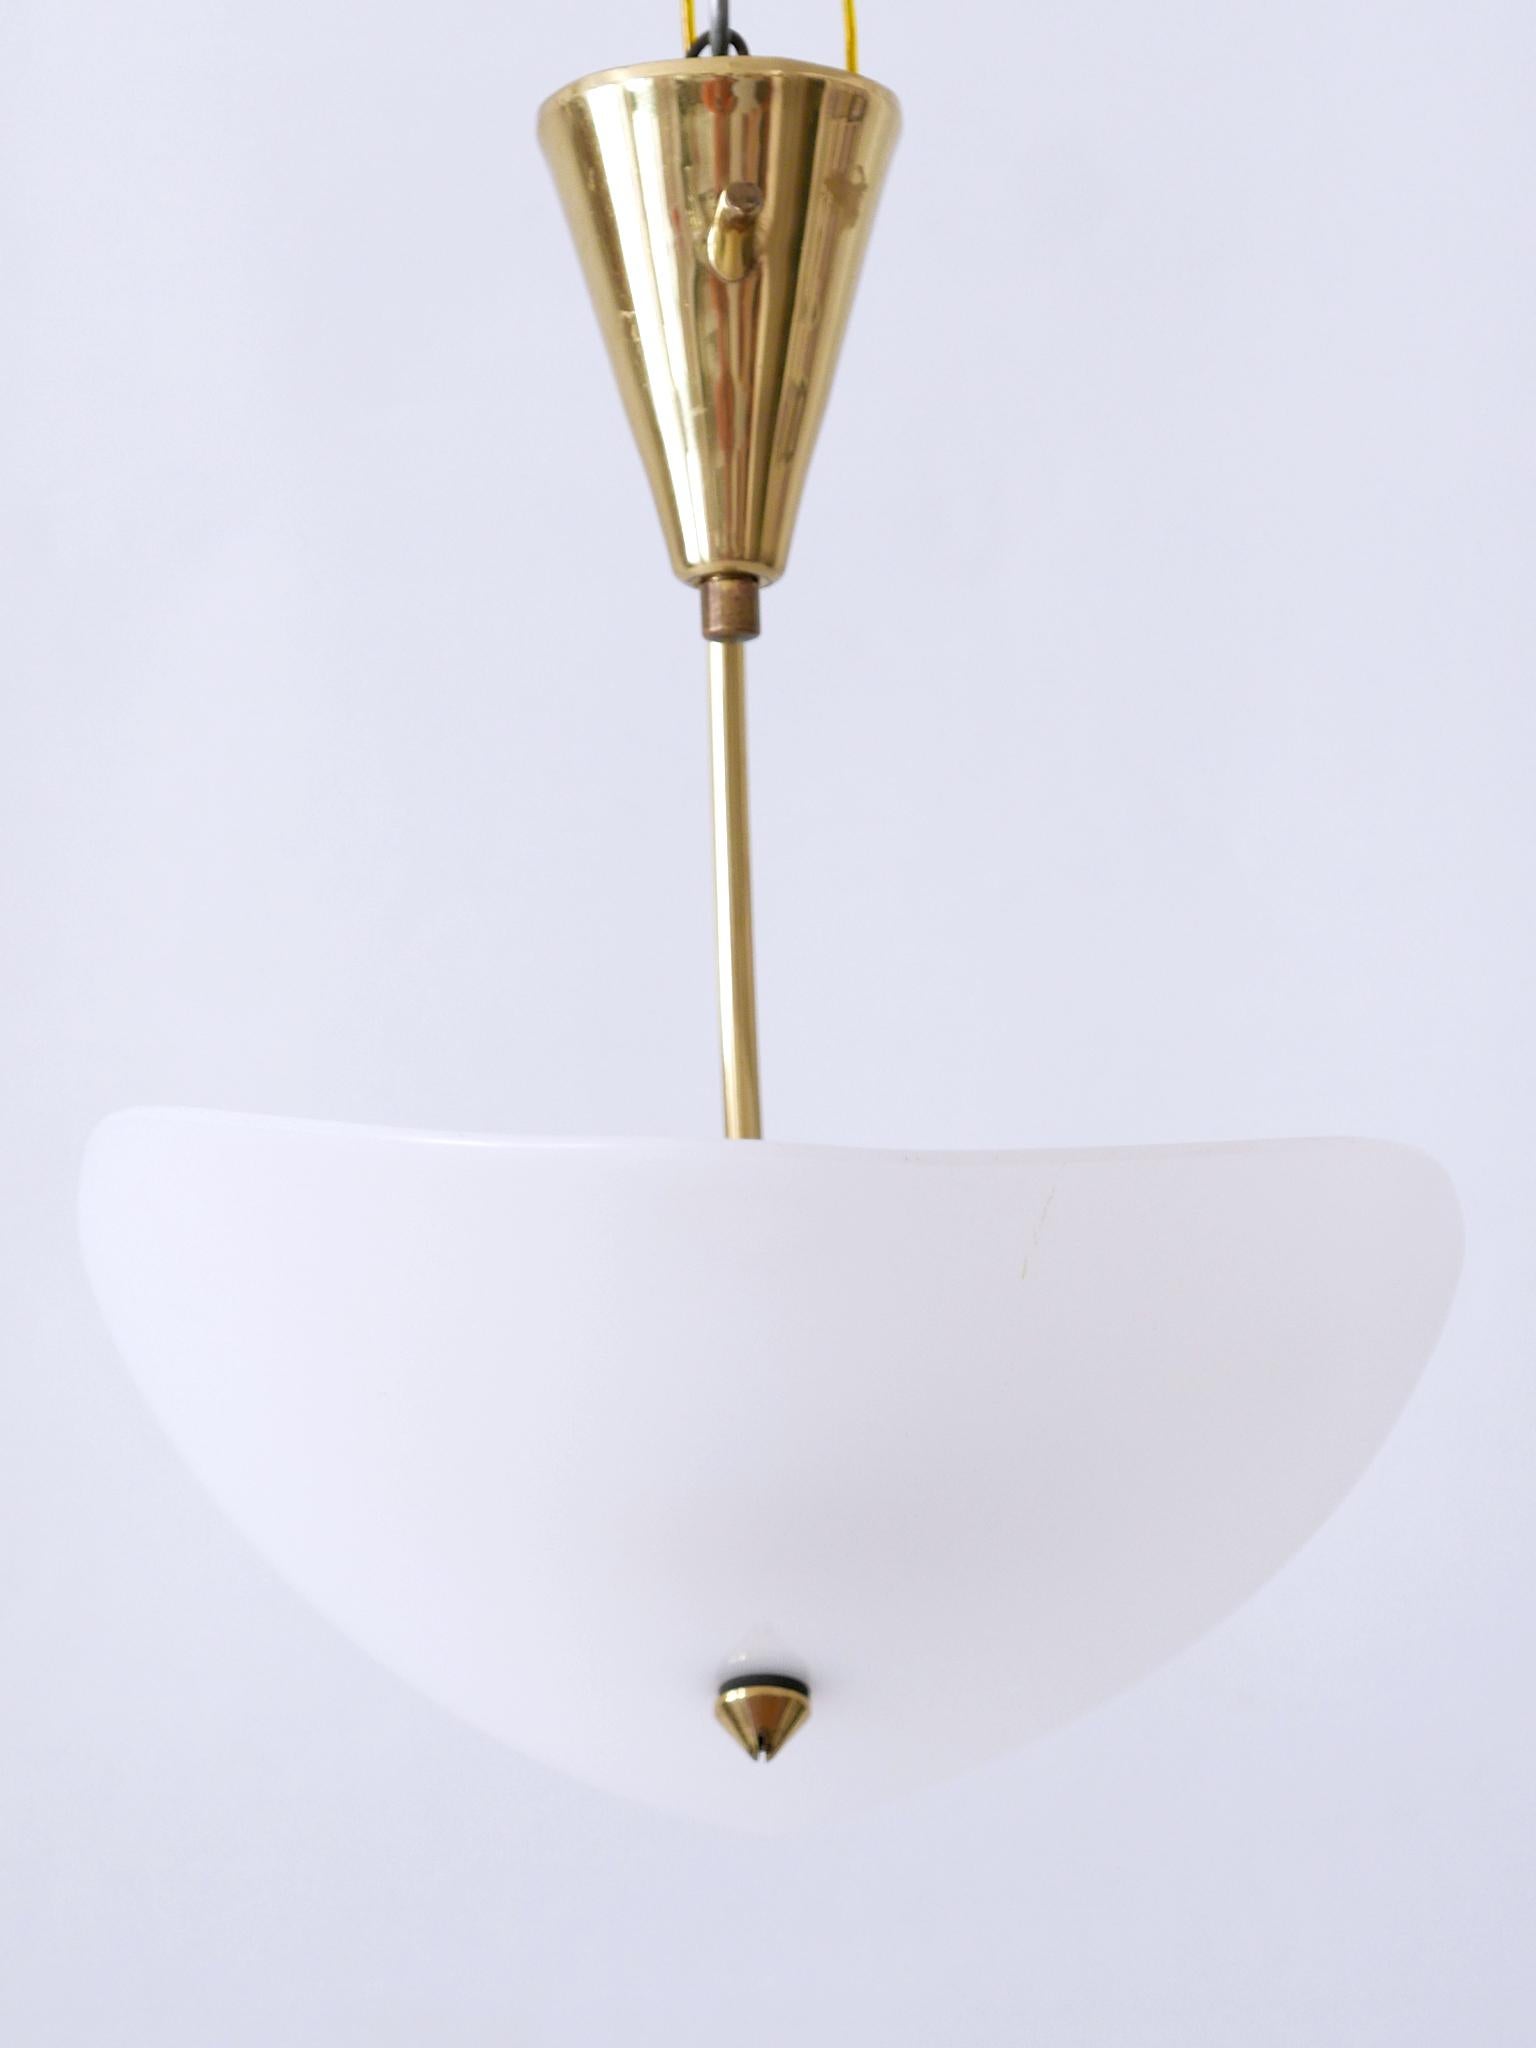 Extremely Rare and Elegant Lucite & Brass Ceiling Lamp Germany 1960s For Sale 1